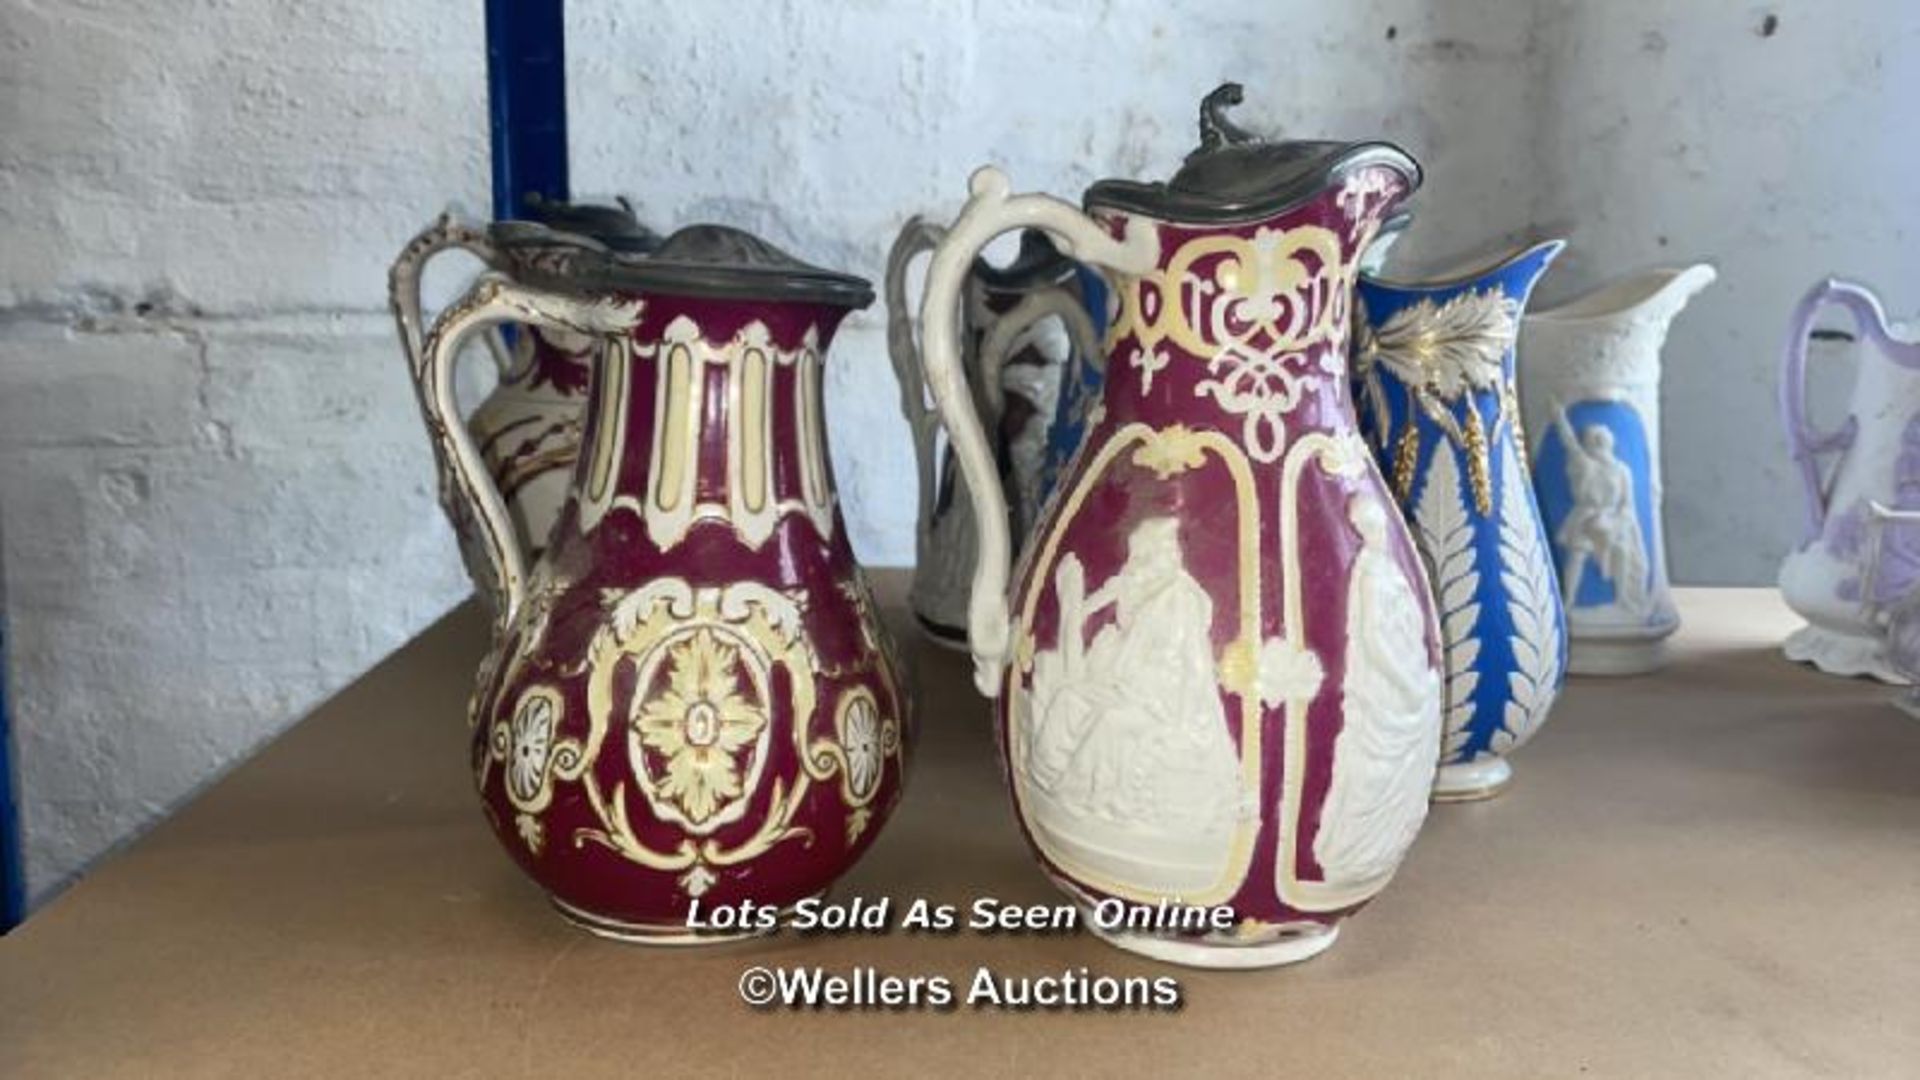 A COLLECTION OF VICTORIAN JUGS, SOME RELIEF MOULDED, SOME WITH LIDS, SOME GRADUATED PAIRS - Image 4 of 17